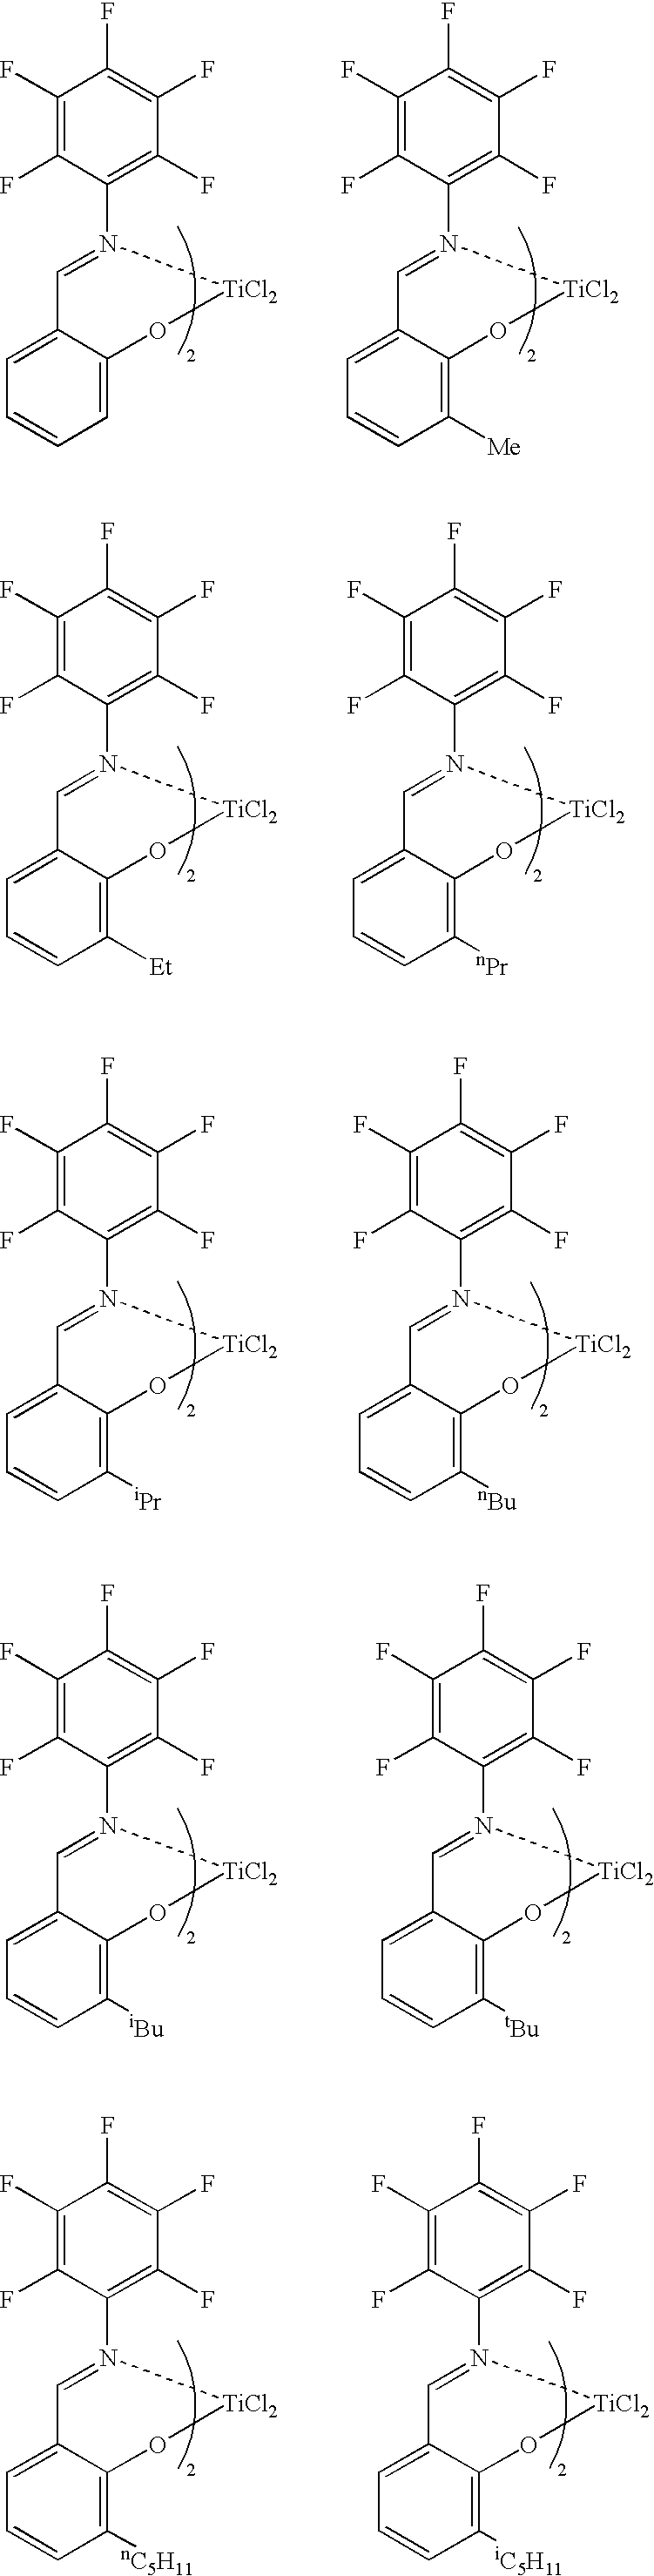 Polyolefin functional at one end